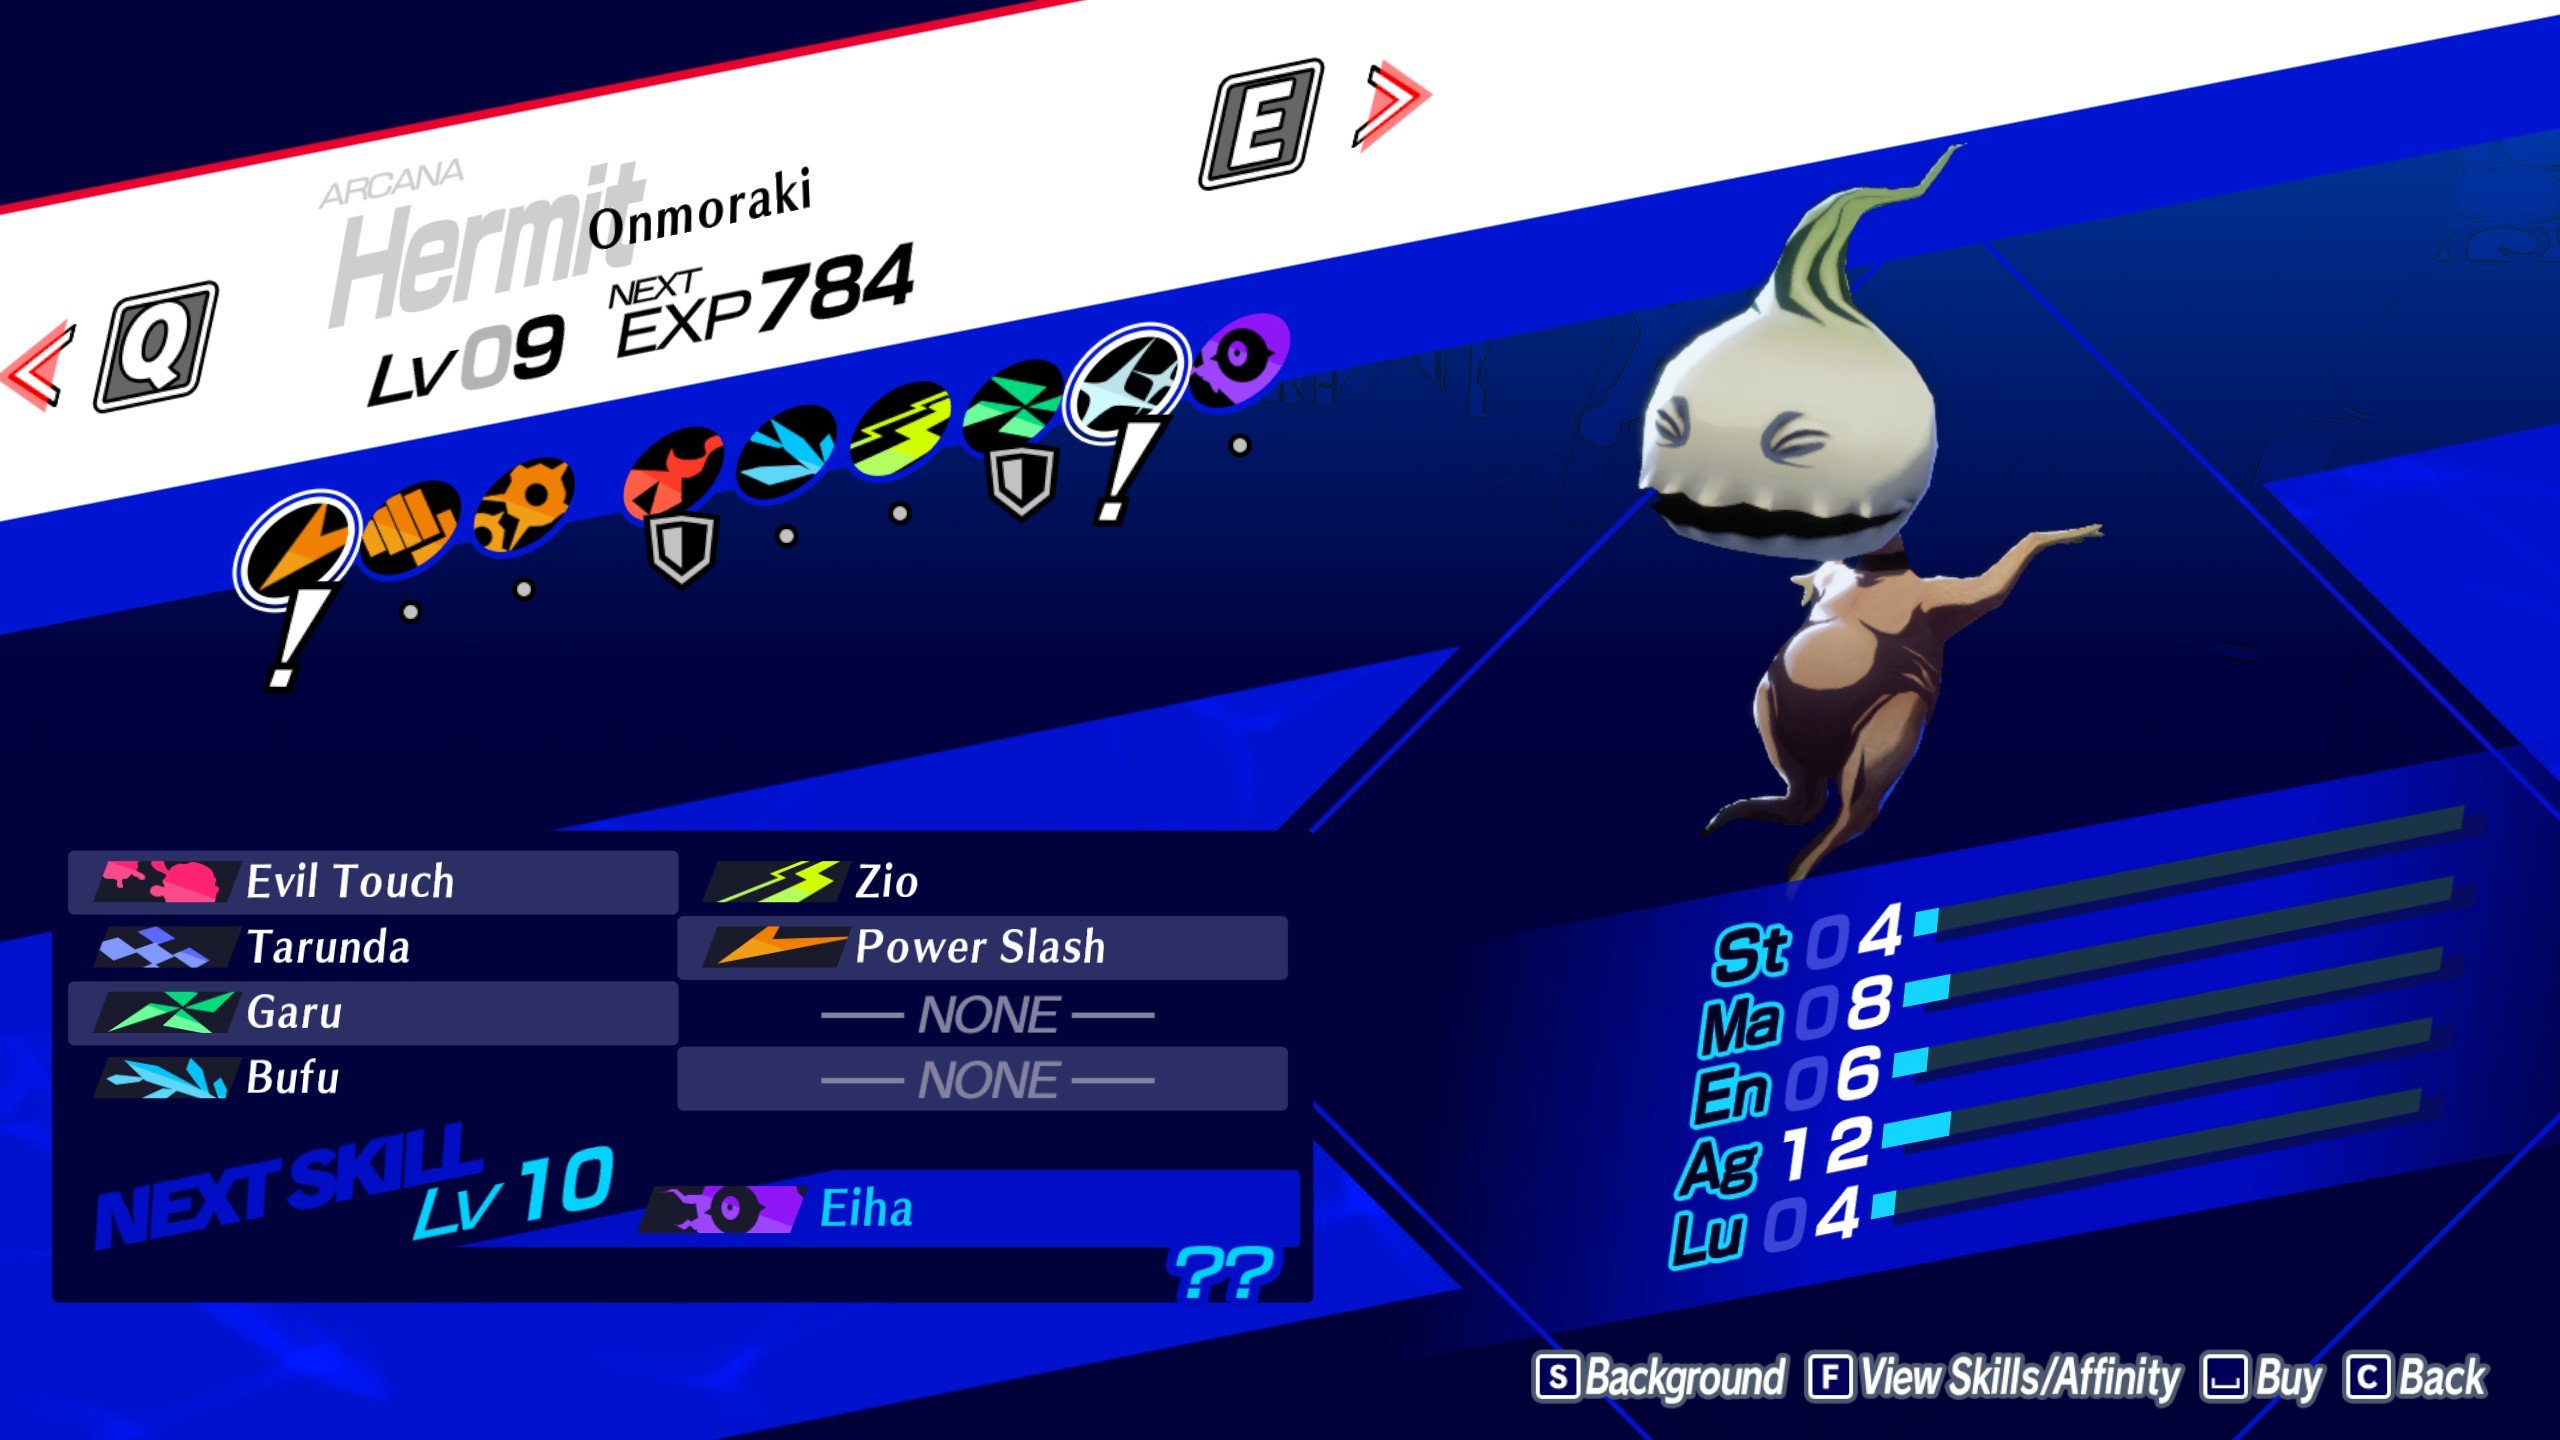 An image showcasing the Hermit Arcana in Persona 3 Reload.